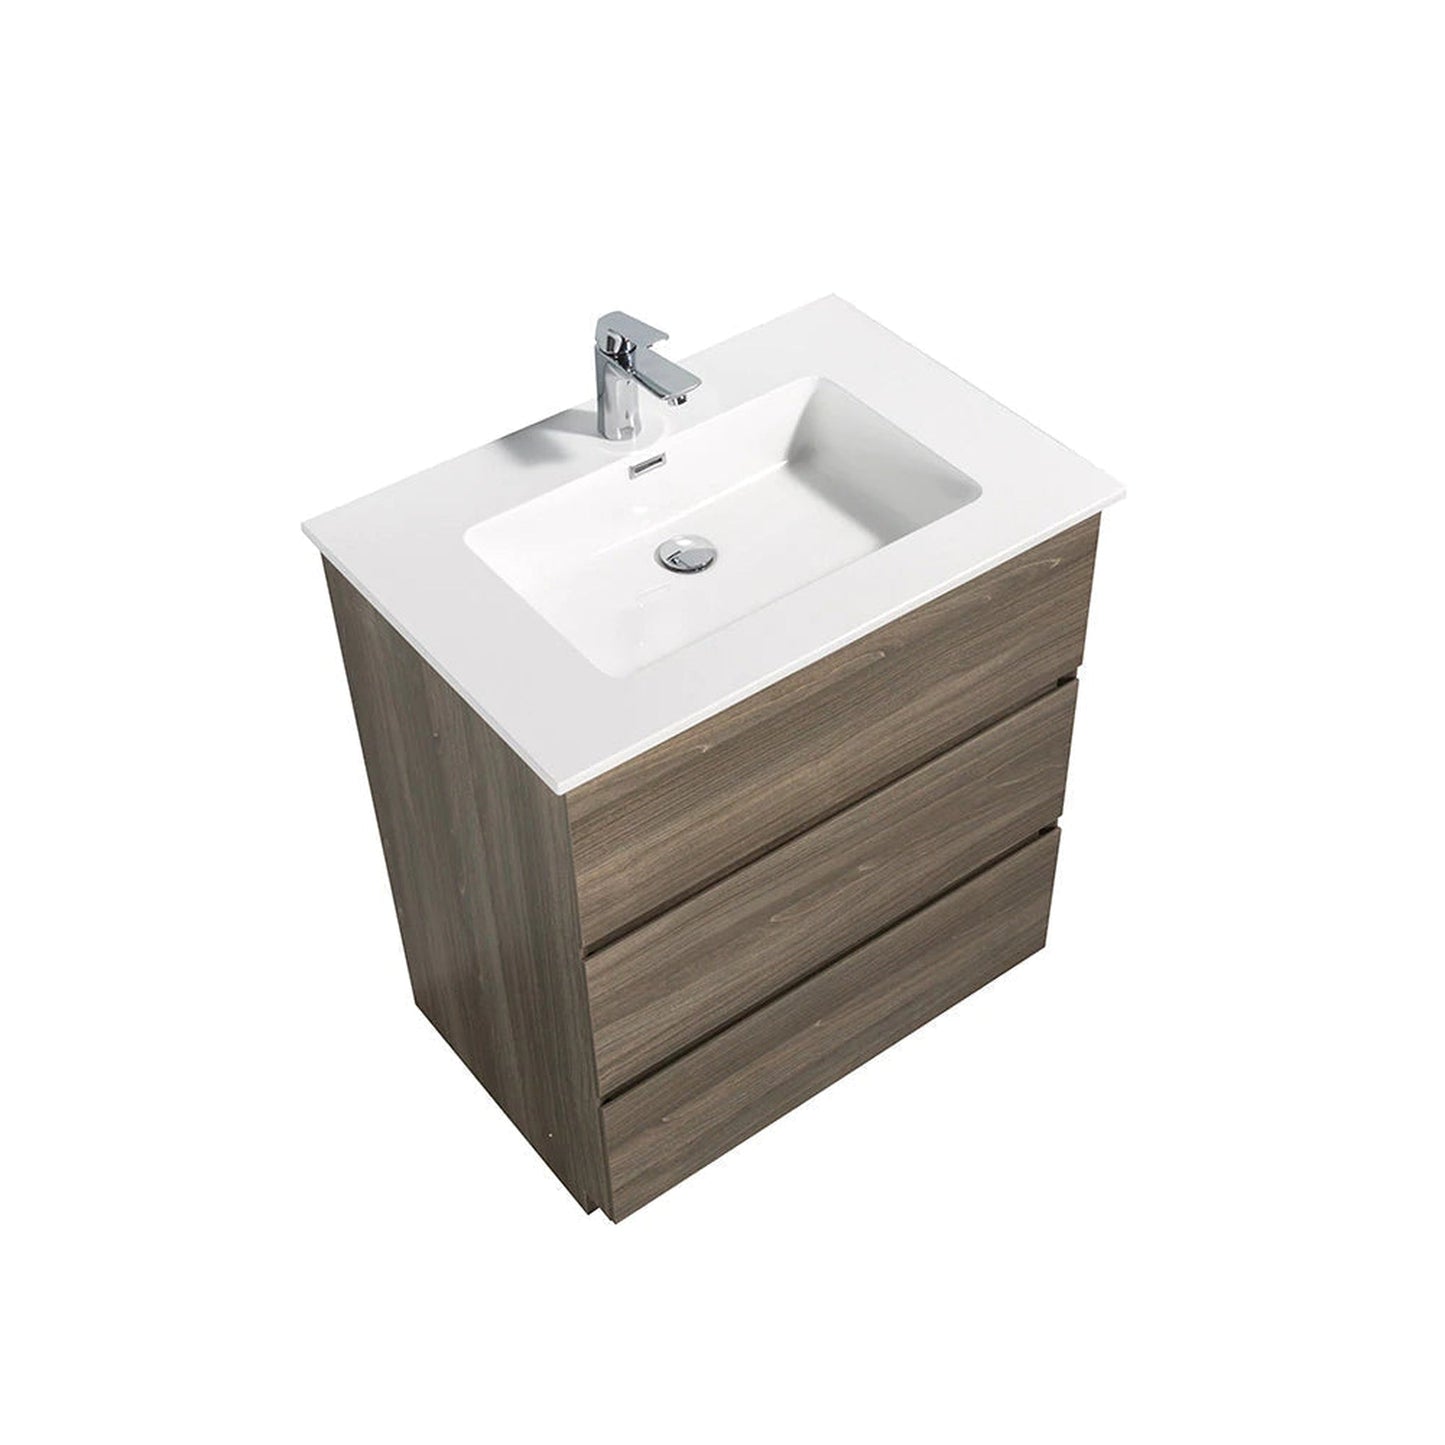 TONA Edison 42" Maple Gray & White Freestanding Bathroom Vanity With Artificial Stone Integrated Top & Sink